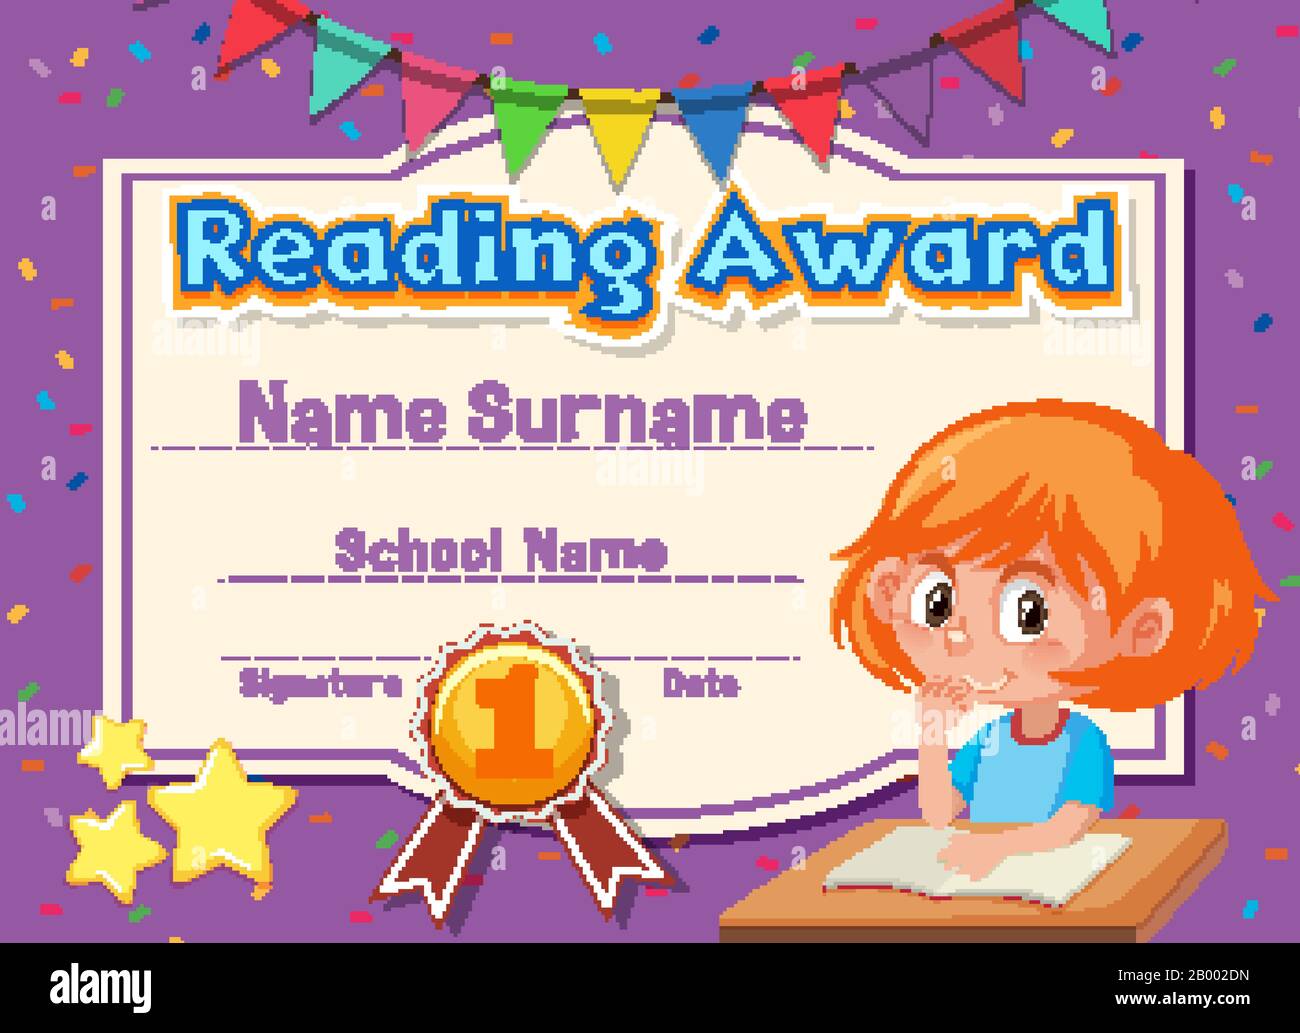 Certificate template for reading award with girl reading in background illustration Stock Vector